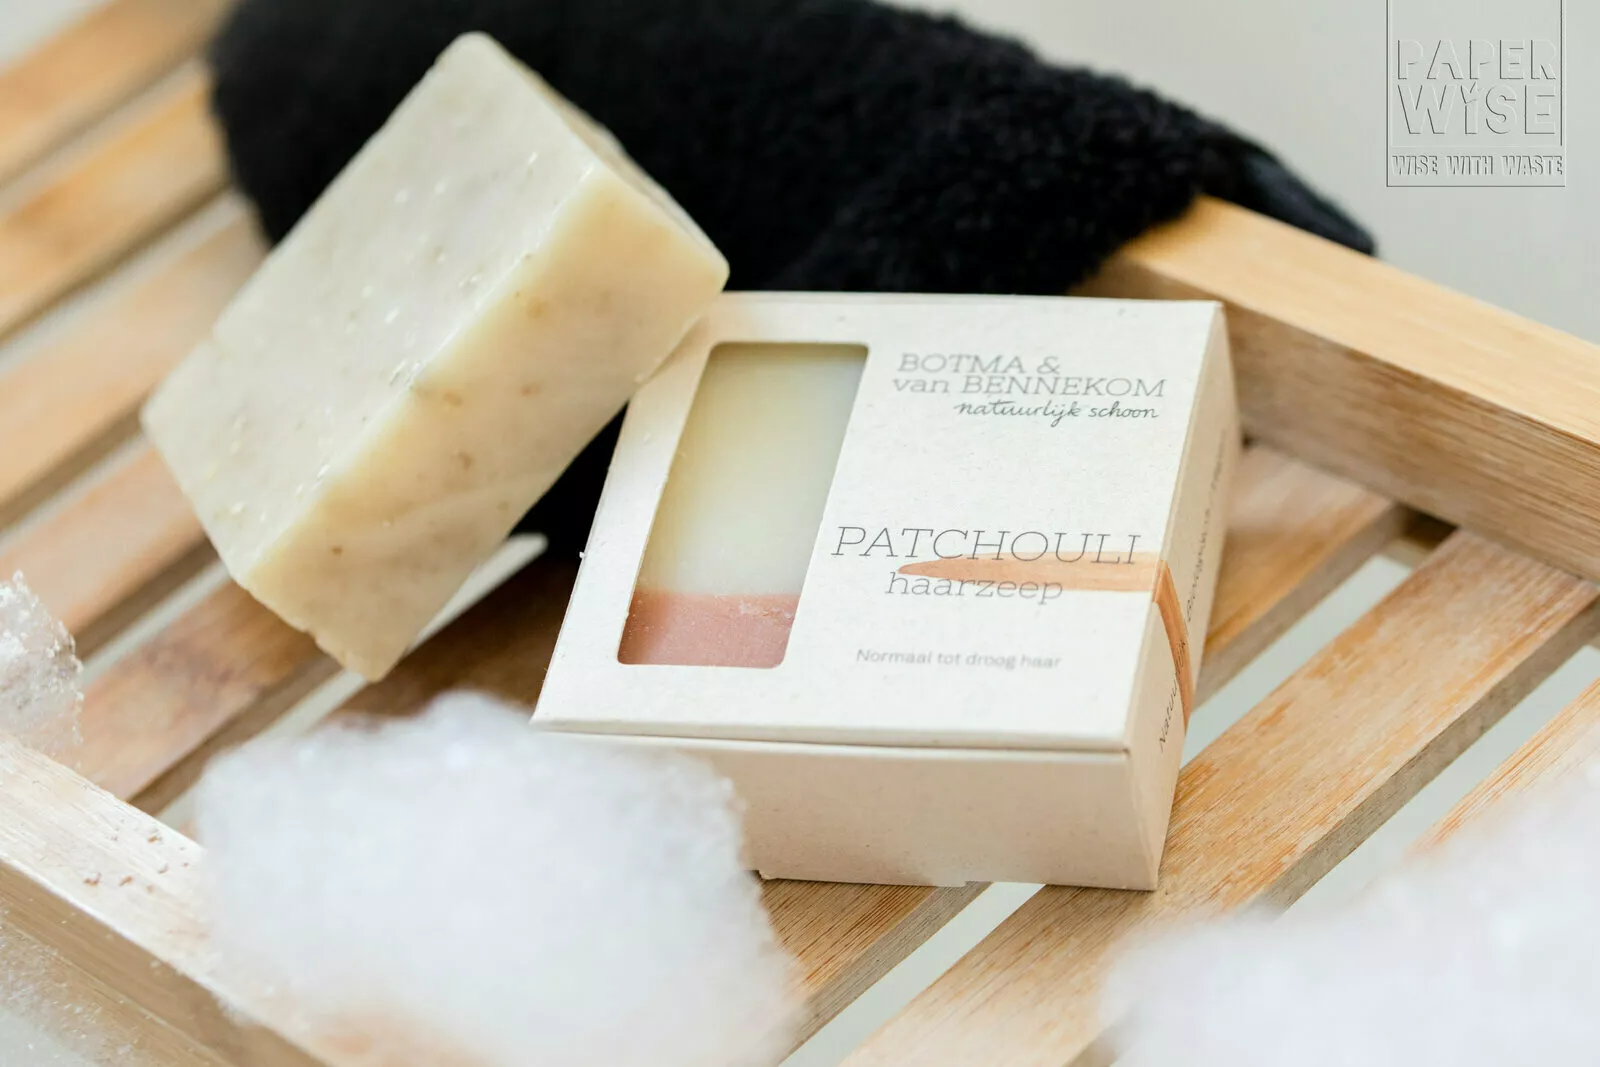 PaperWise eco friendly paper sustainablesoap bar box packaging BotmaenvanBennekom